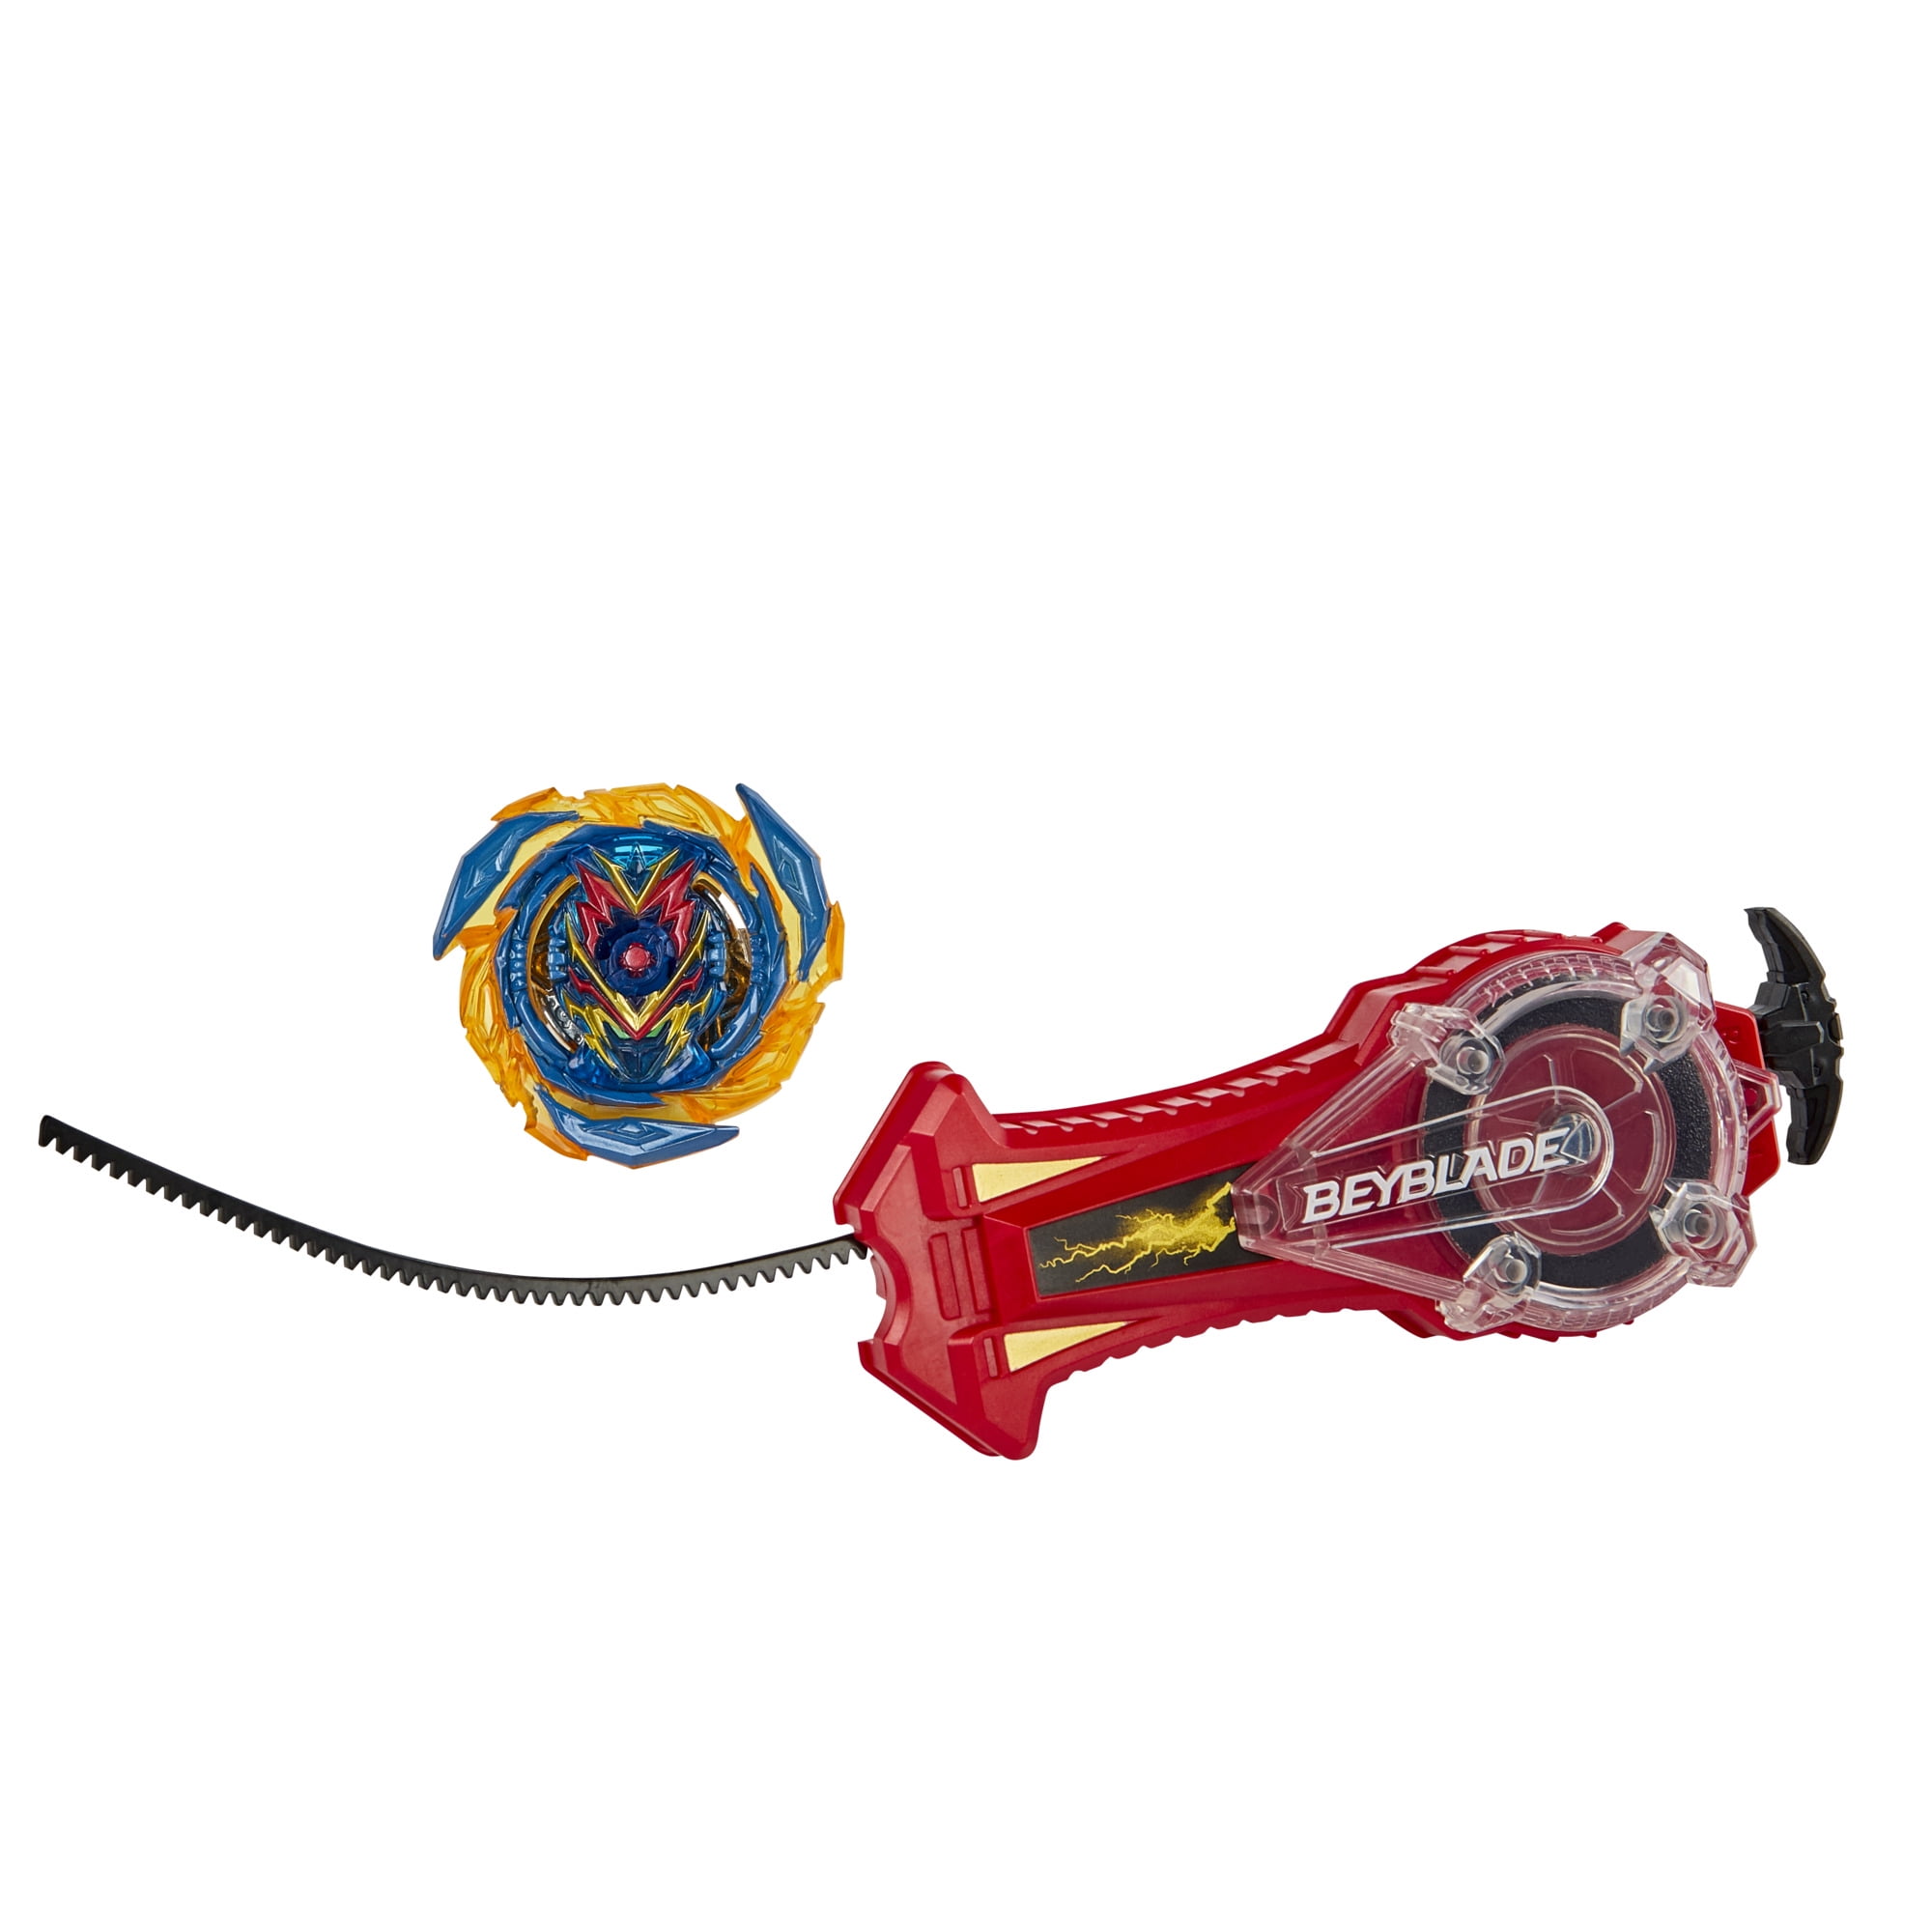 Beyblade Ripcord Launcher Blasting Fighting Toy Boost Booster Kids Gift 